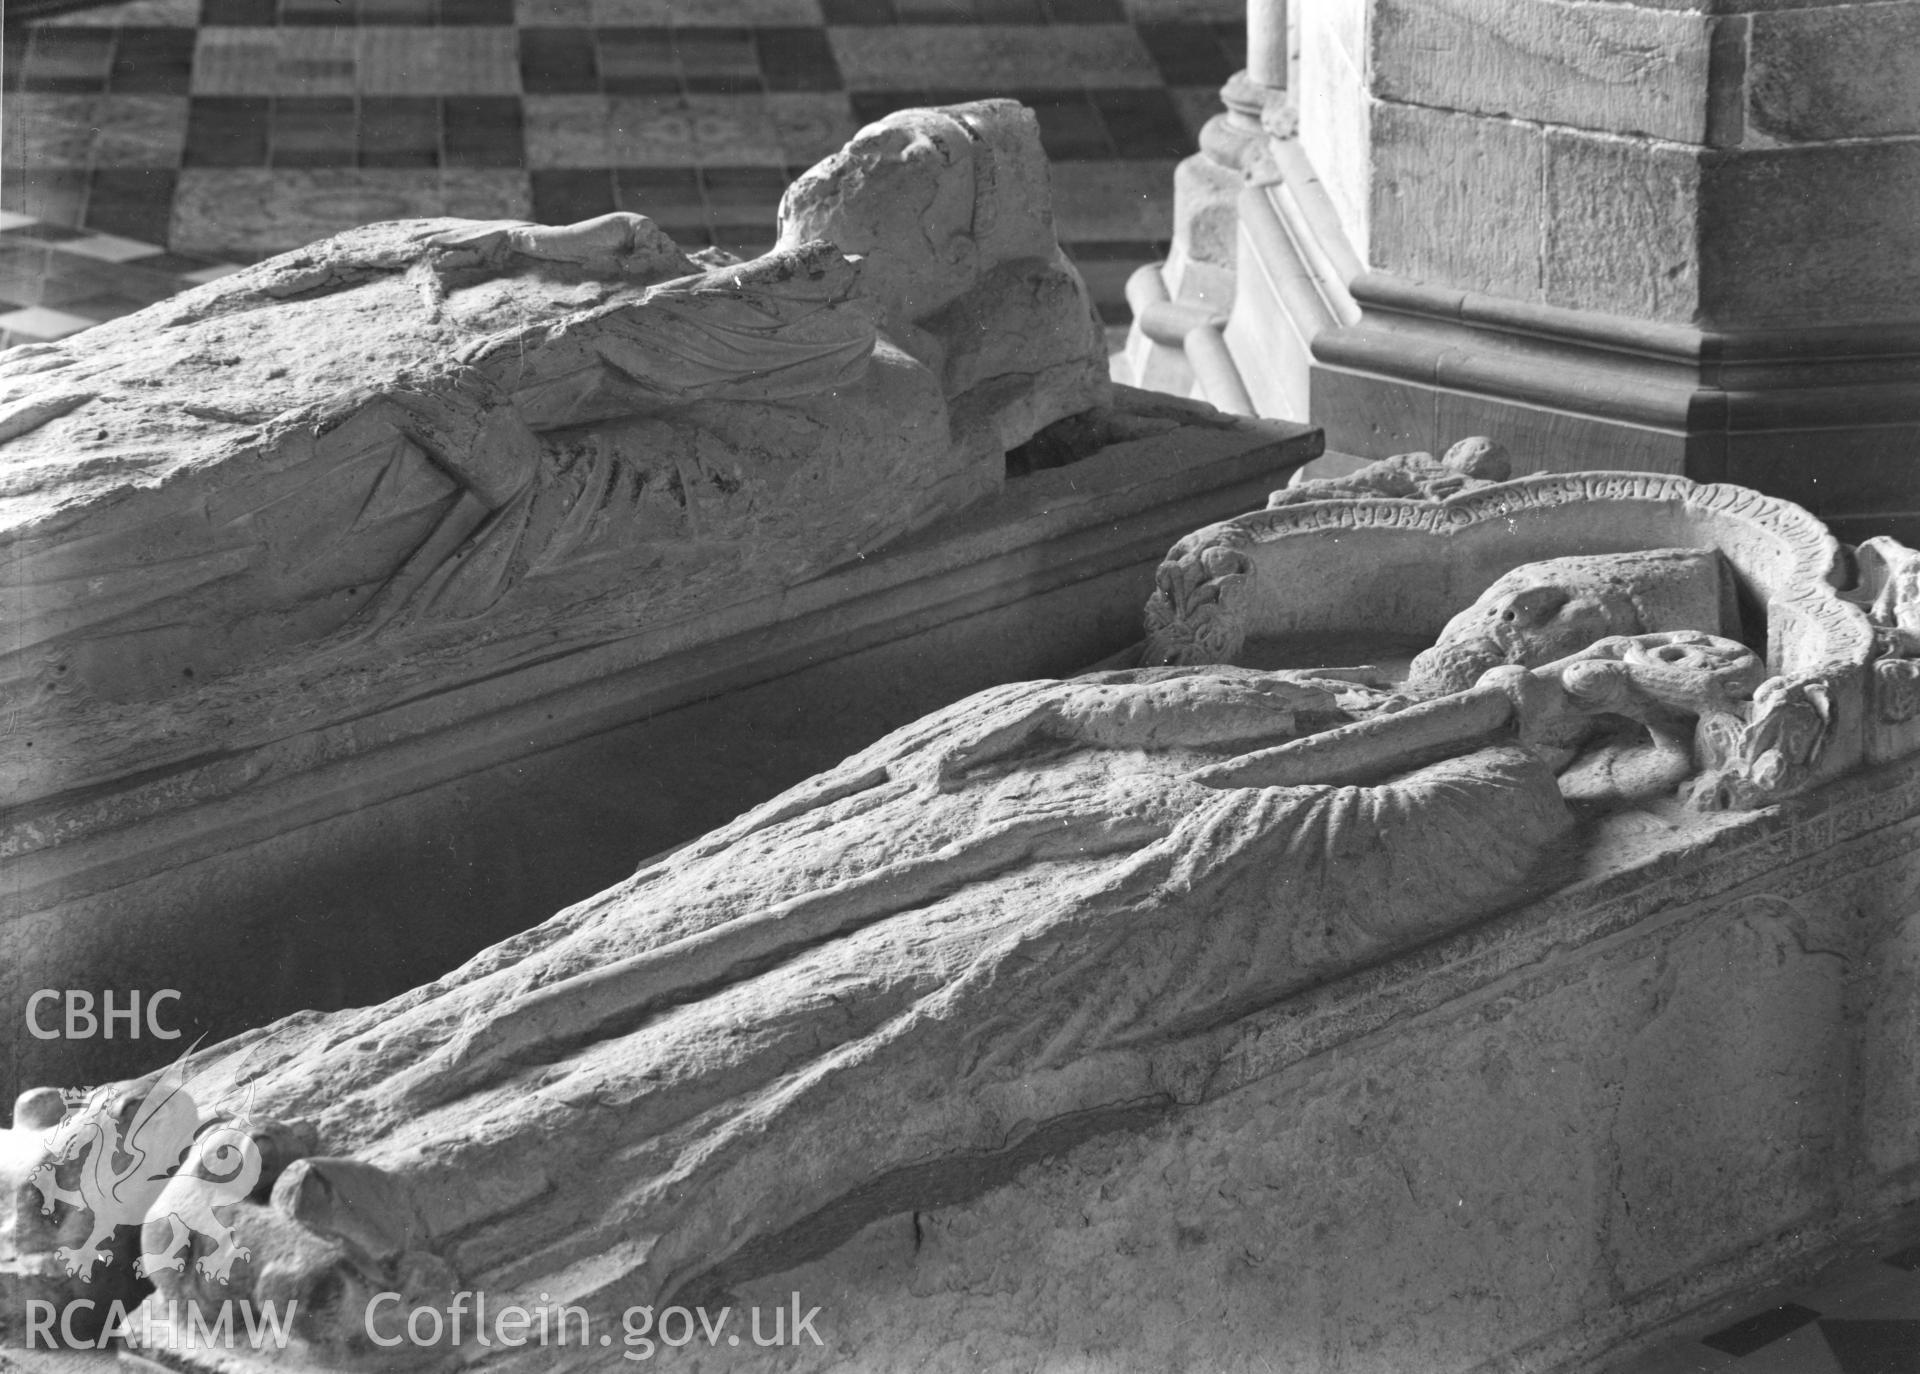 Digital copy of a black and white nitrate negative showing view of effigies on tombs at St. David's Cathedral, taken by E.W. Lovegrove, July 1936.